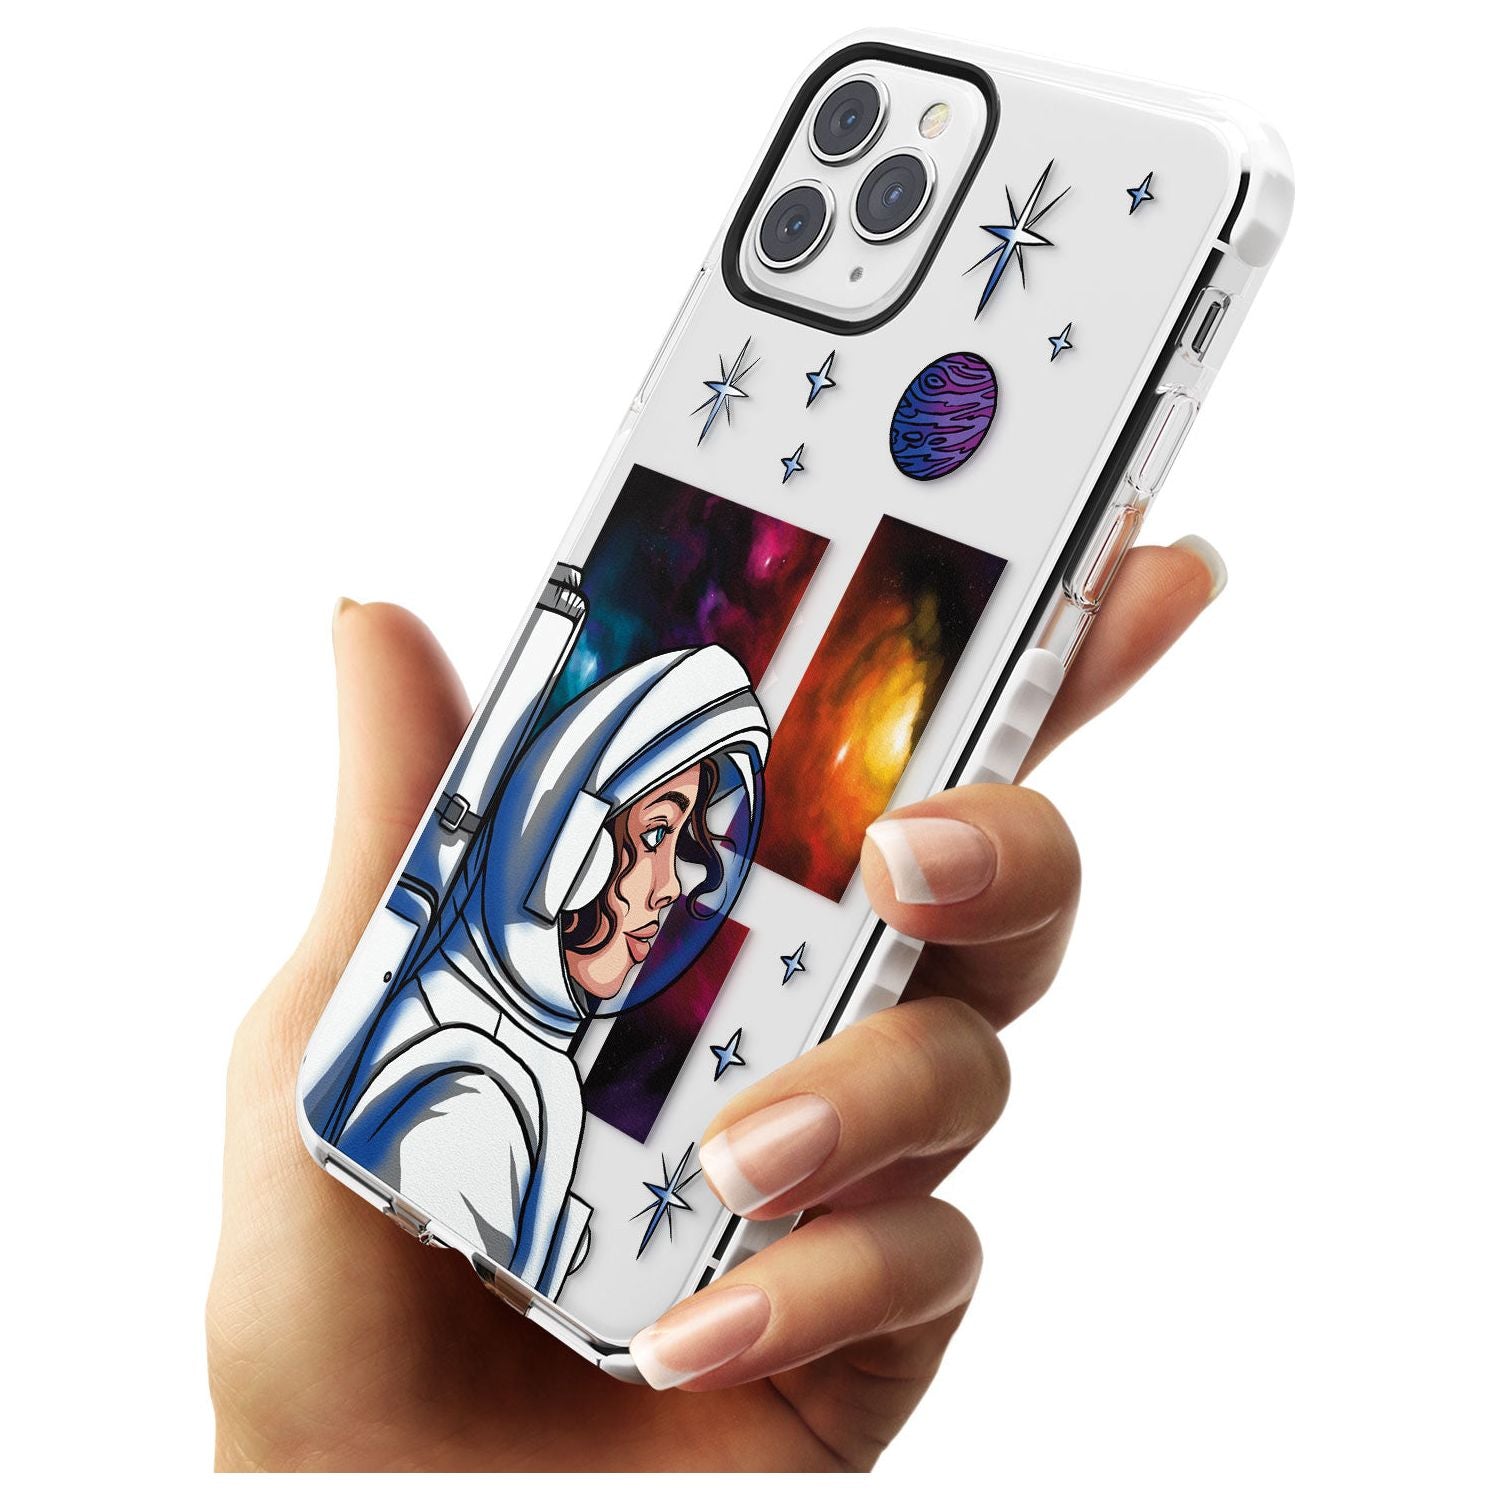 COSMIC AMBITION Slim TPU Phone Case for iPhone 11 Pro Max